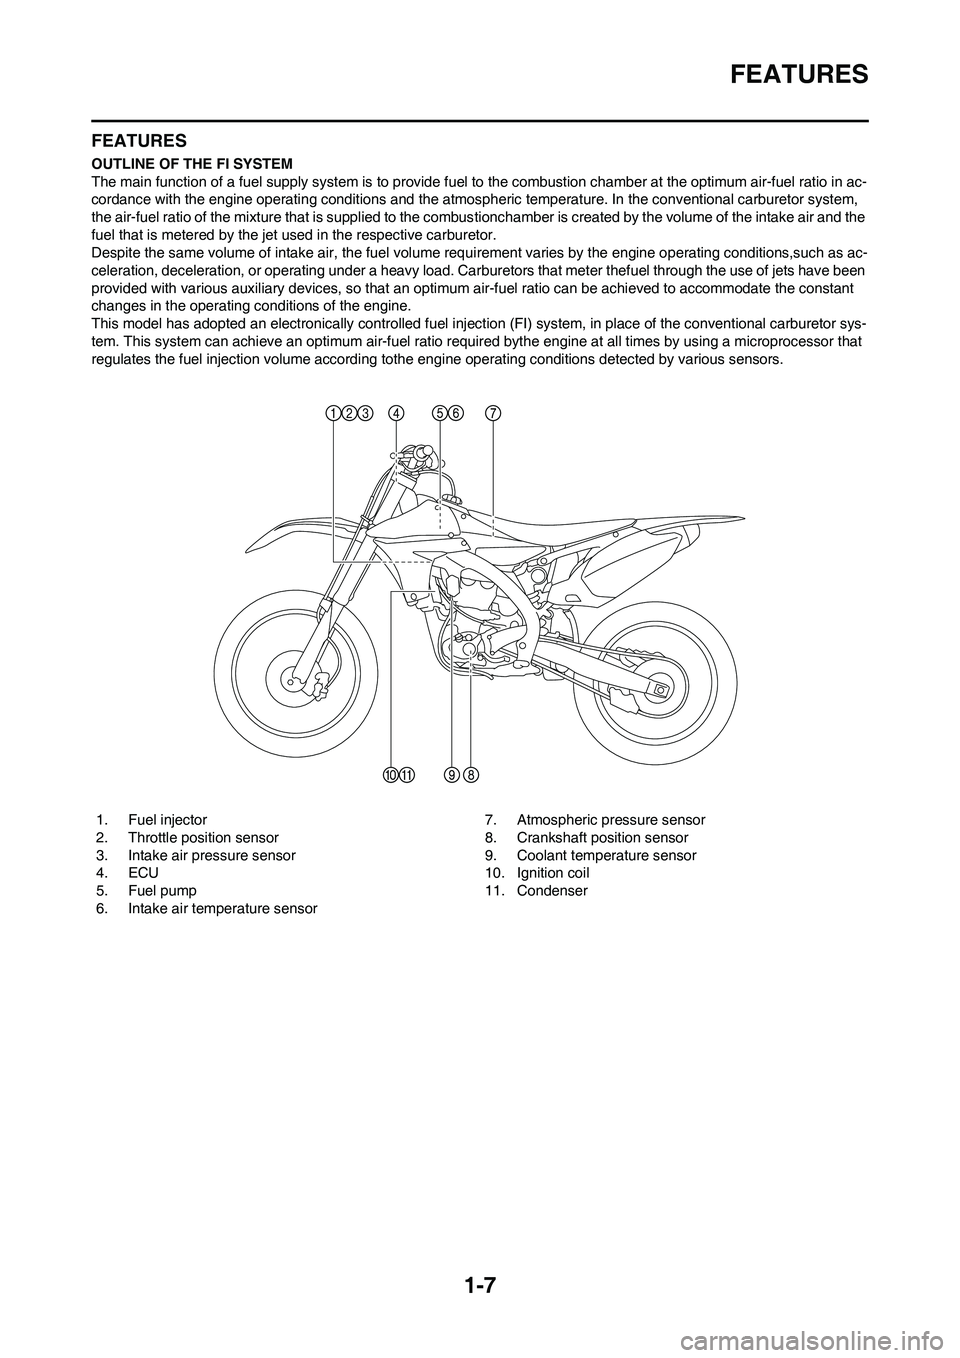 YAMAHA YZ450F 2011  Owners Manual 1-7
FEATURES
FEATURES
OUTLINE OF THE FI SYSTEM
The main function of a fuel supply system is to provide fuel to the combustion chamber at the optimum air-fuel ratio in ac-
cordance with the engine oper